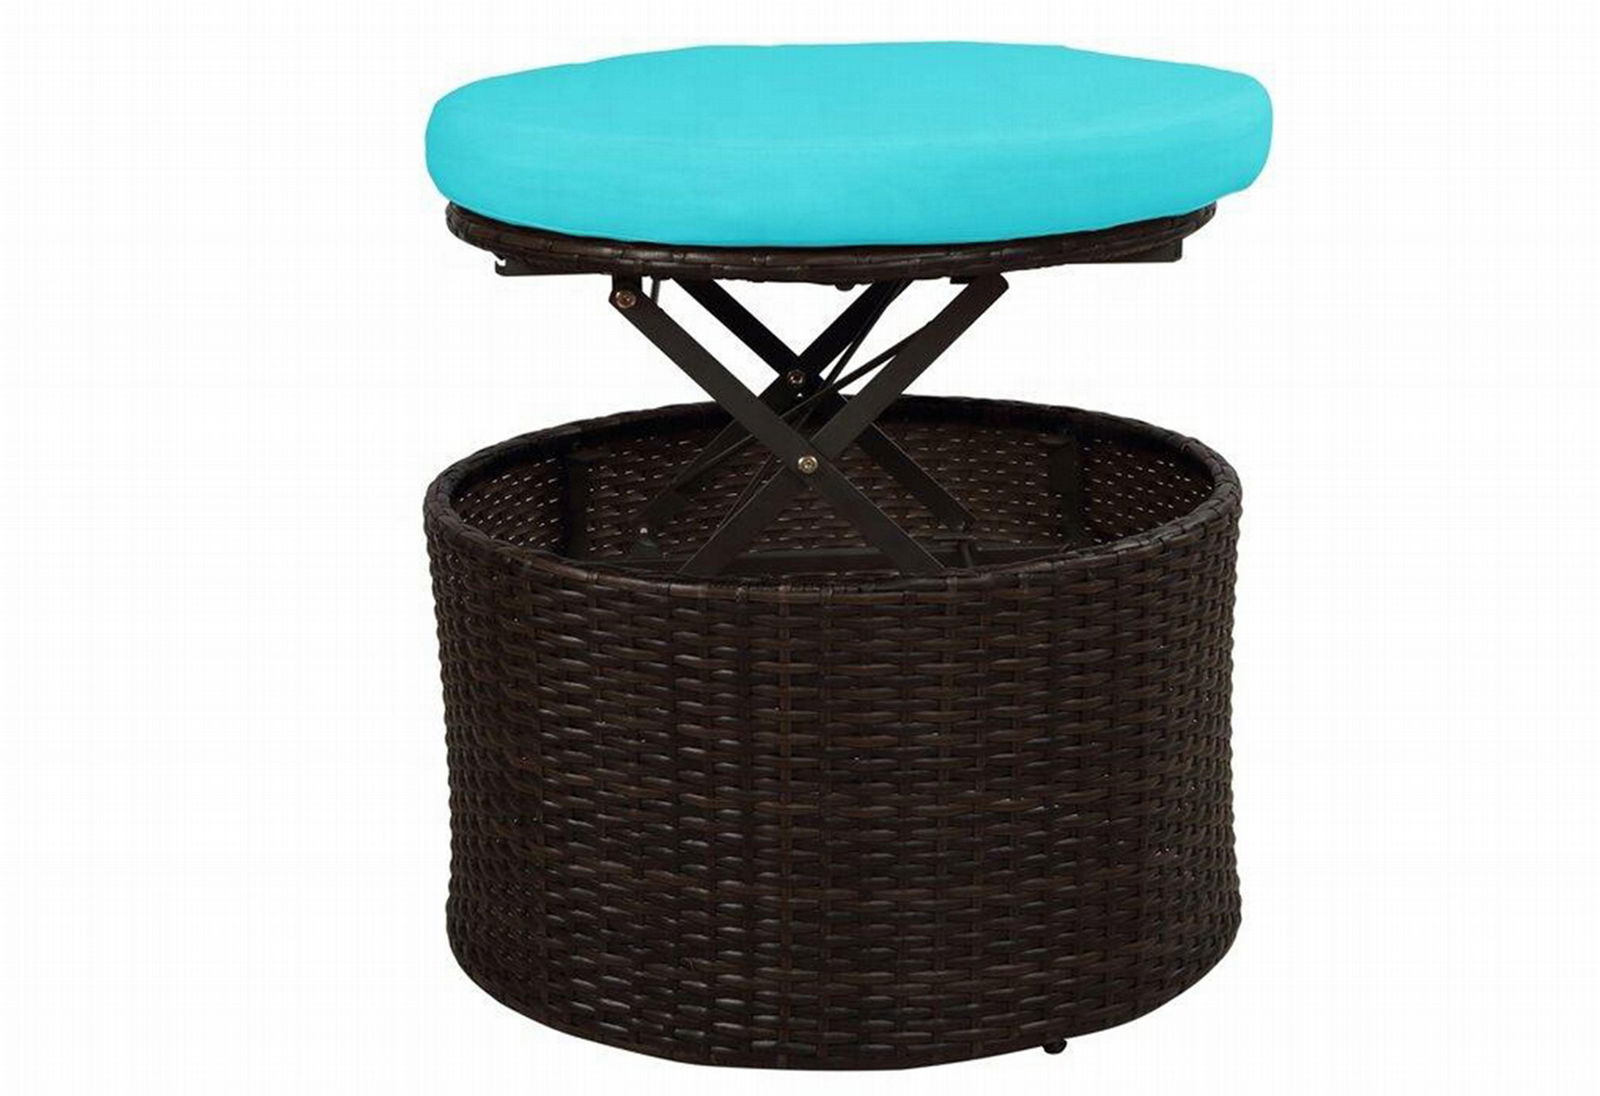  Patio Sectional Sofa Conversation Sets Rattan Round Resin Wicker Daybed 4